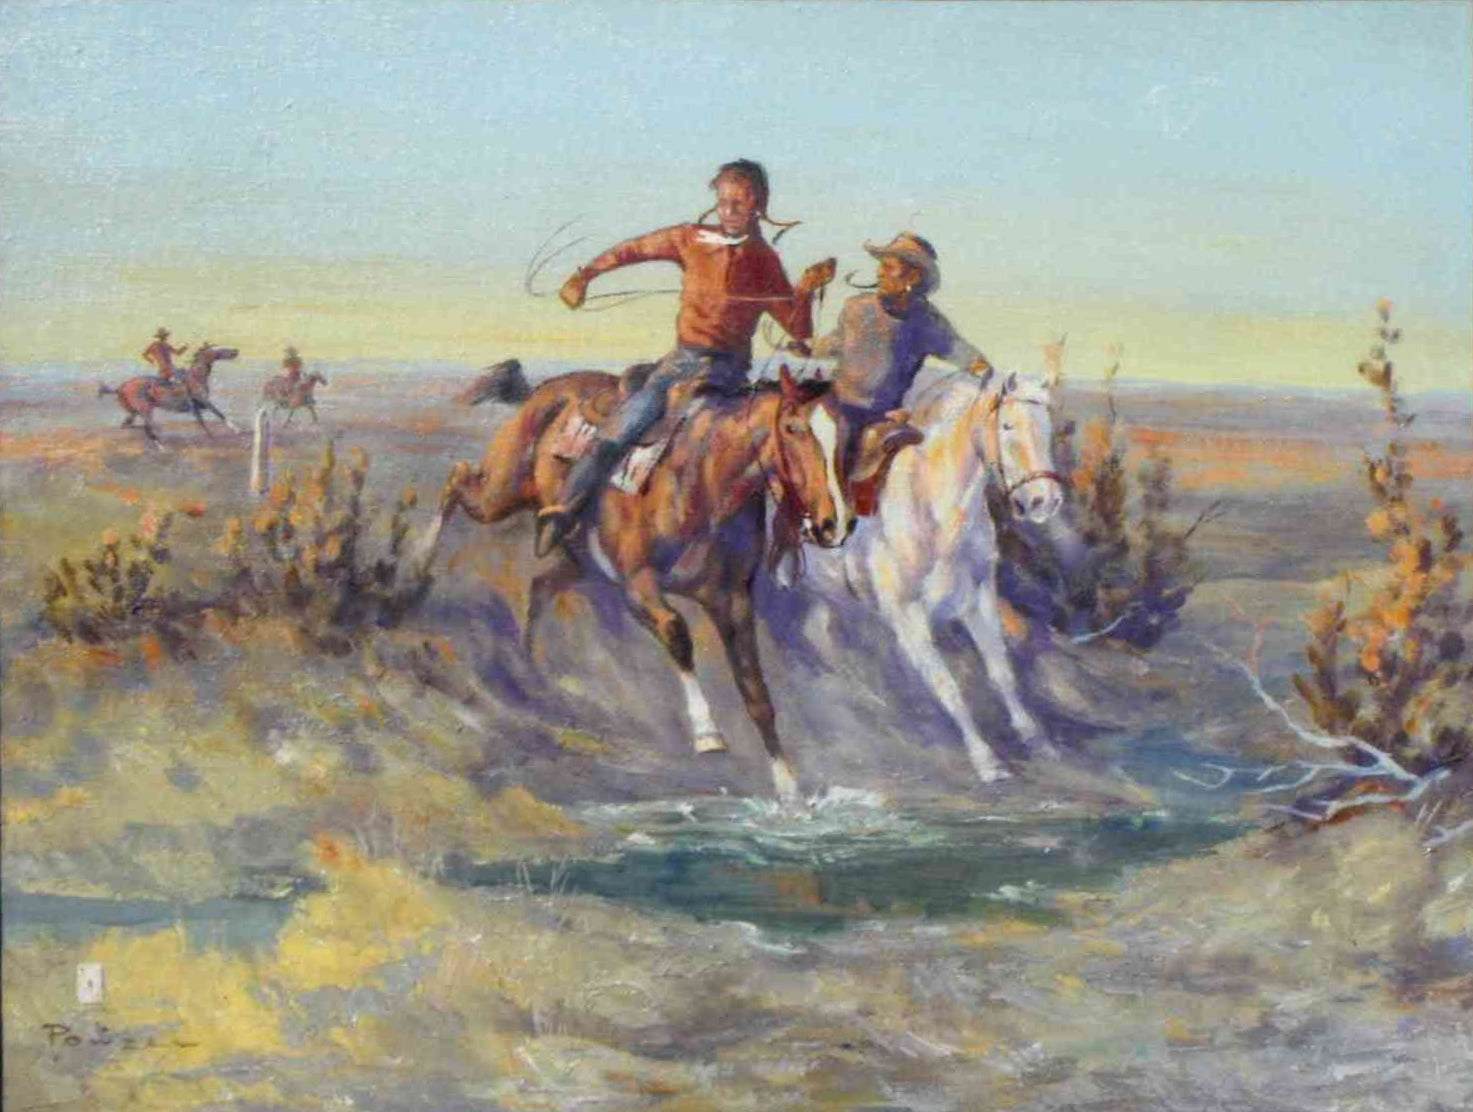 "Chasing the Blackfeet" by Ace Powell, Fine Art, Painting, Western